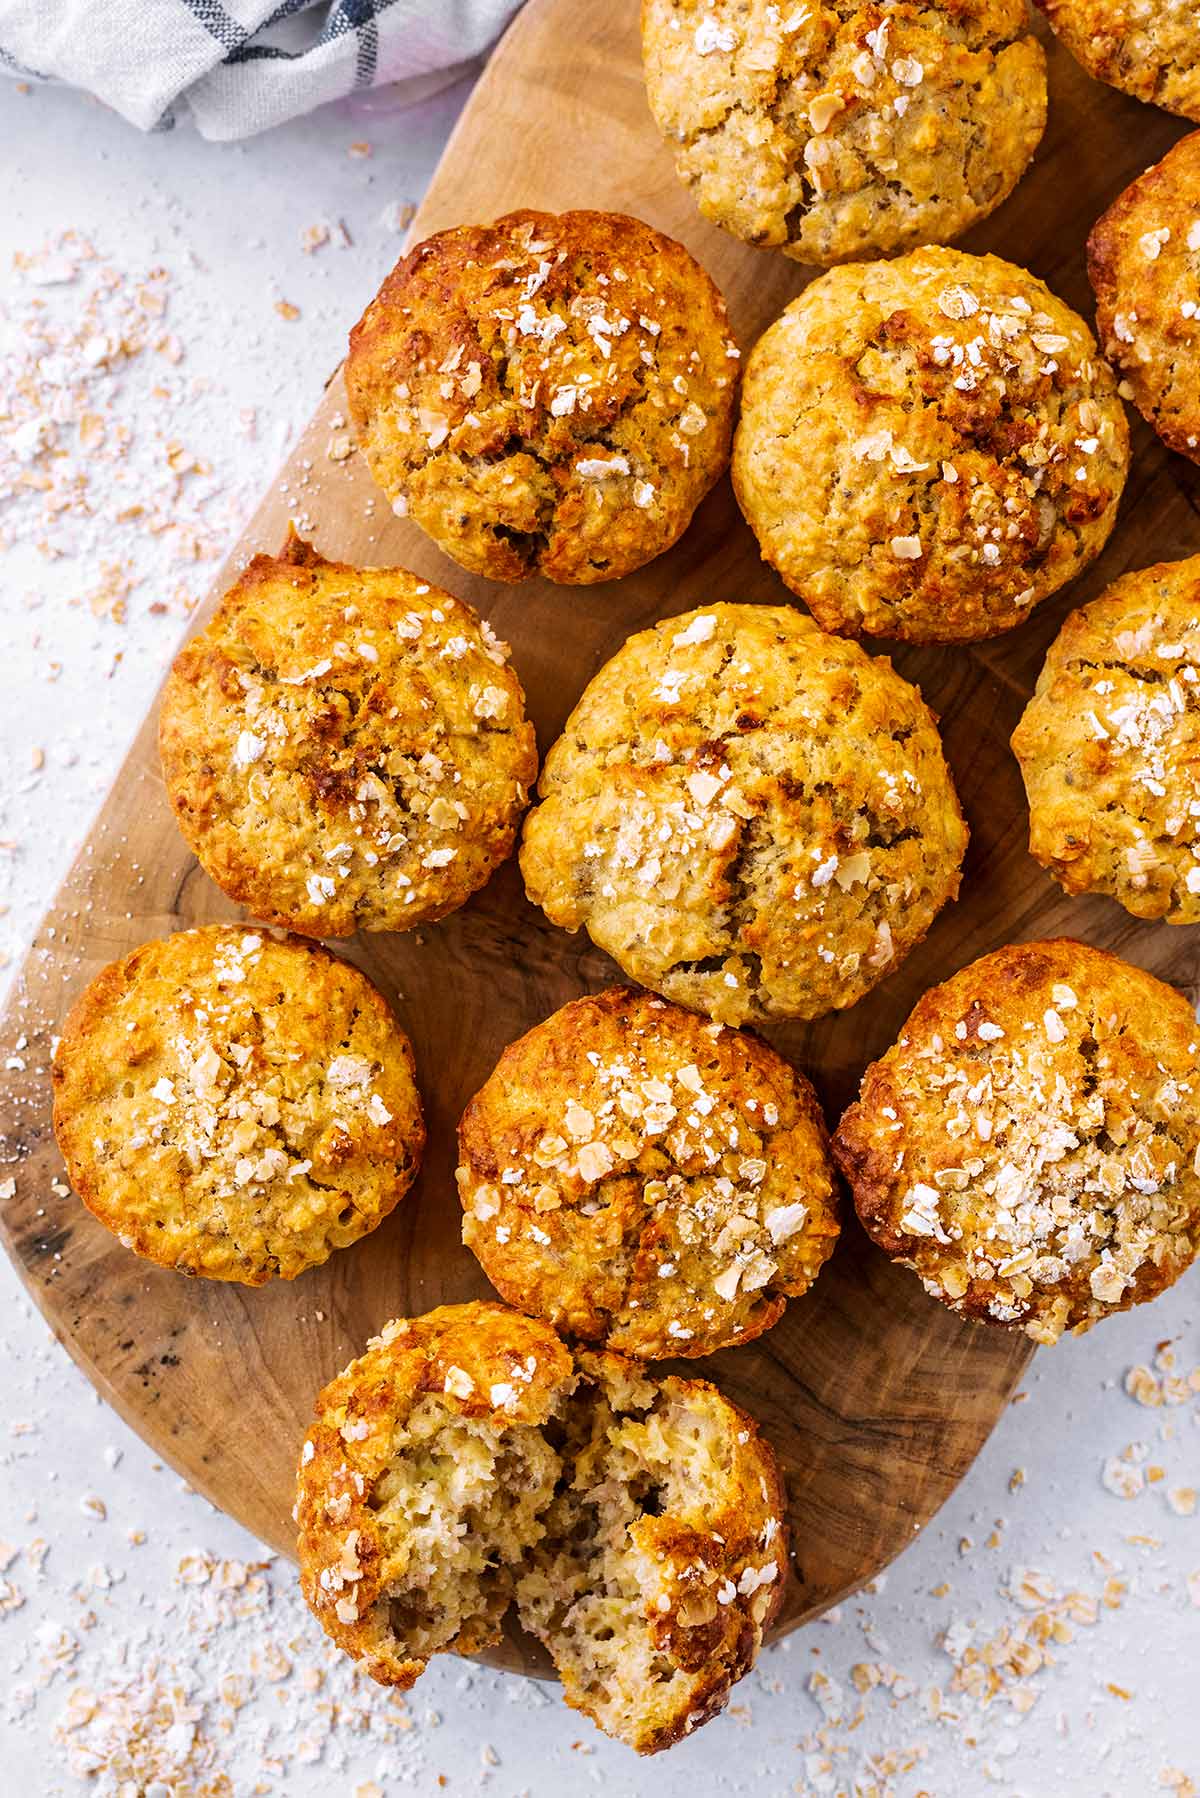 Banana muffins on a wooden board surrounded by scattered oats.